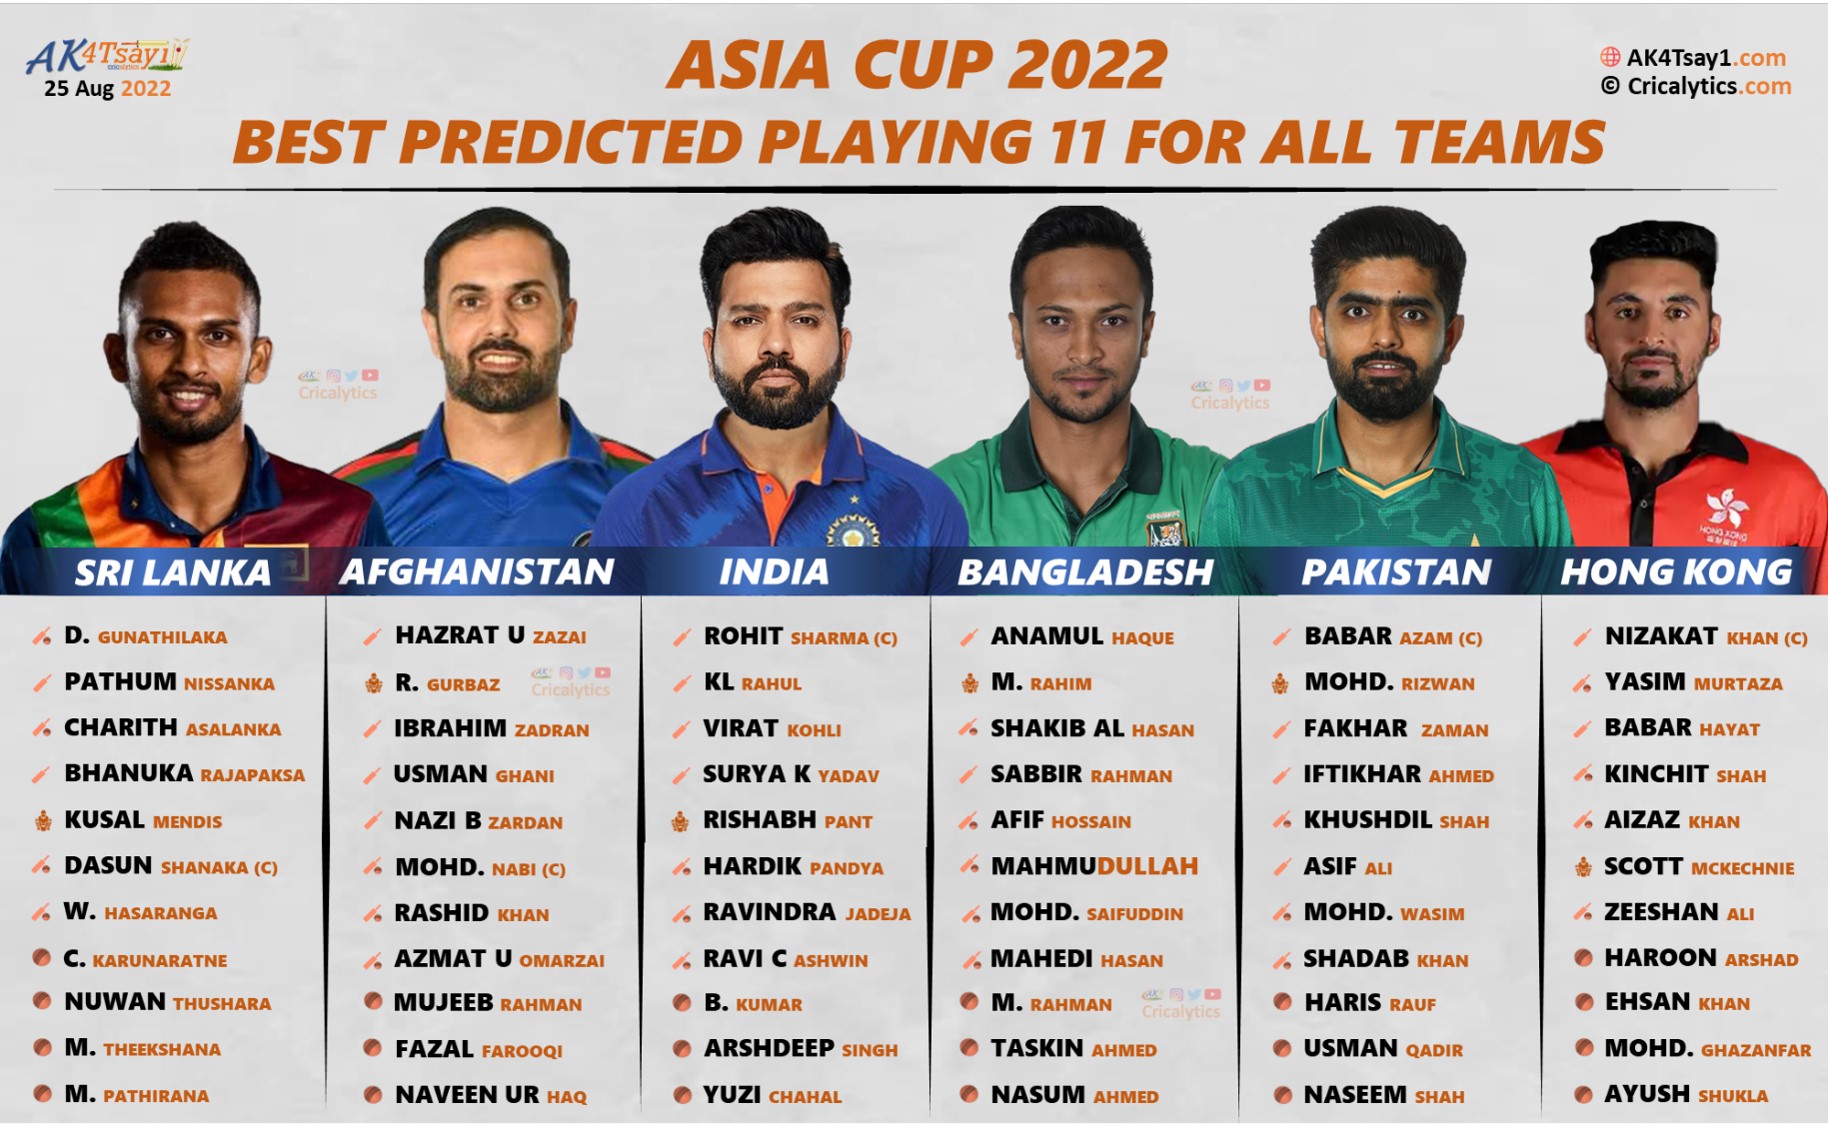 asia-cup-2022-ranking-the-best-predicted-playing-11-for-all-6-teams